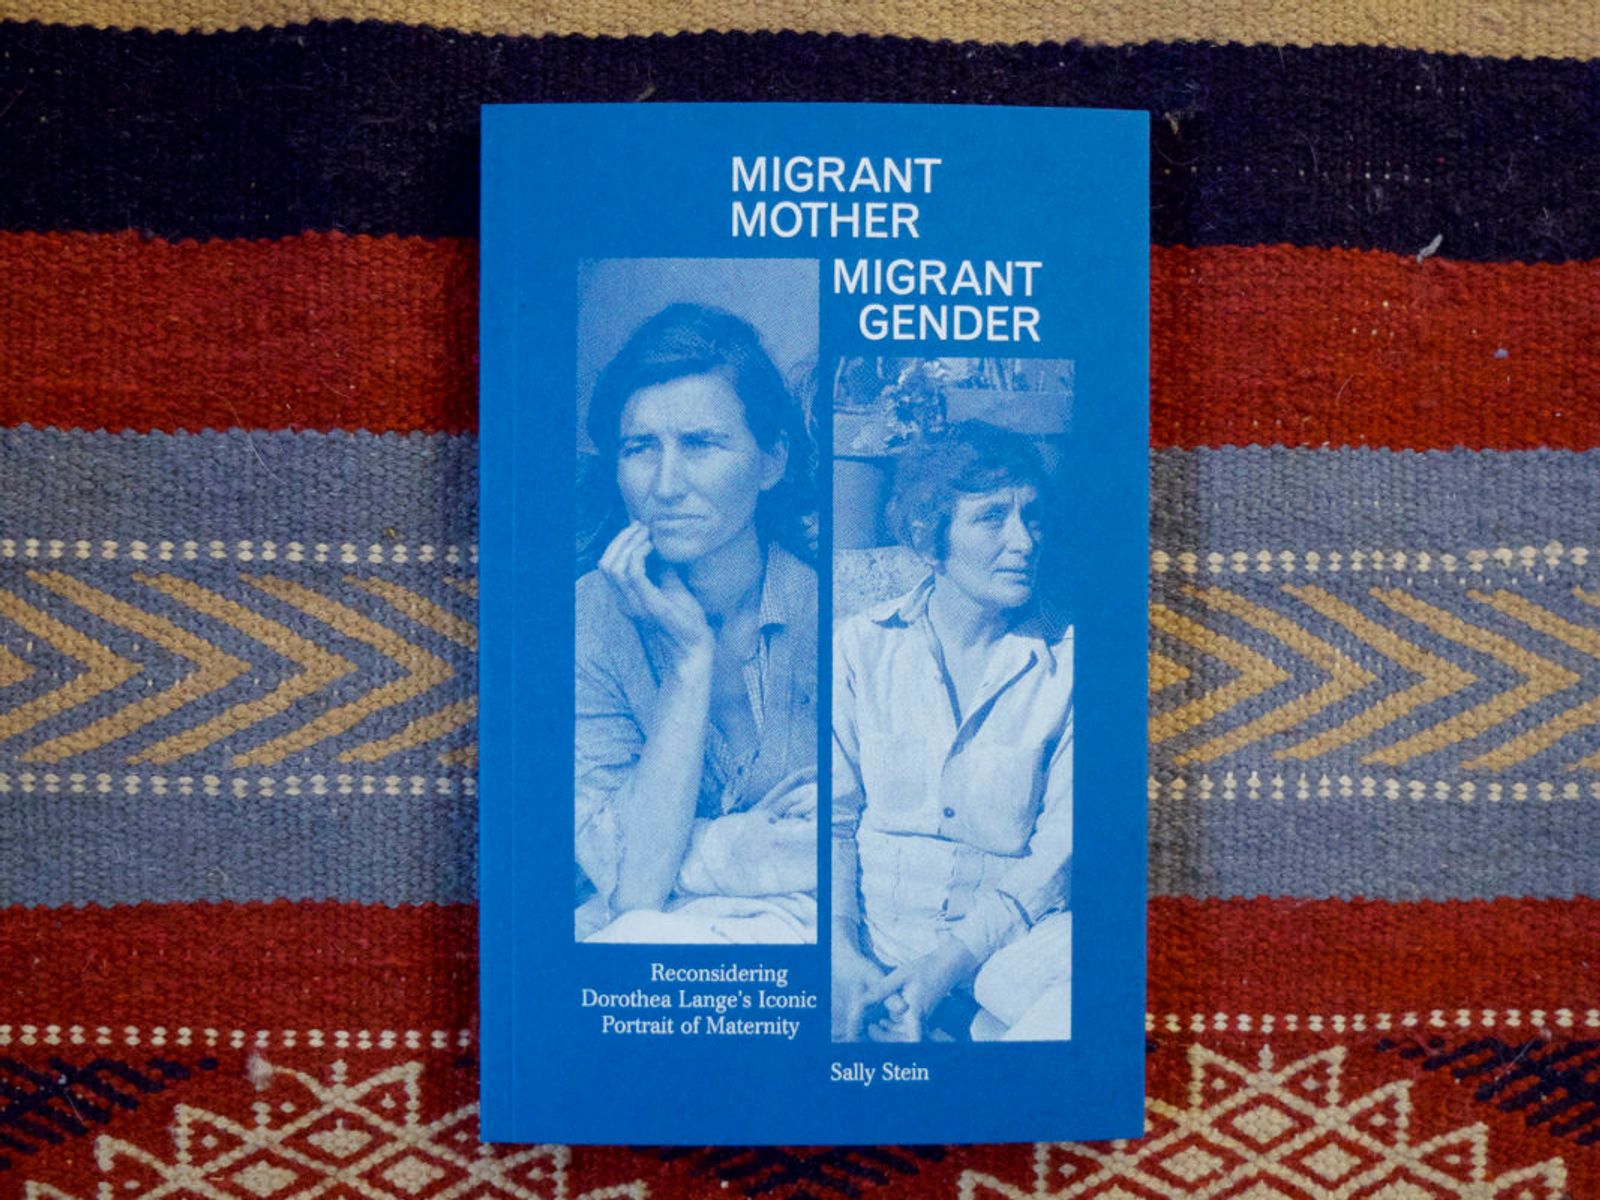 © Leporello Books - Image from the MIGRANT MOTHER, MIGRANT GENDER by Sally Stein photography project